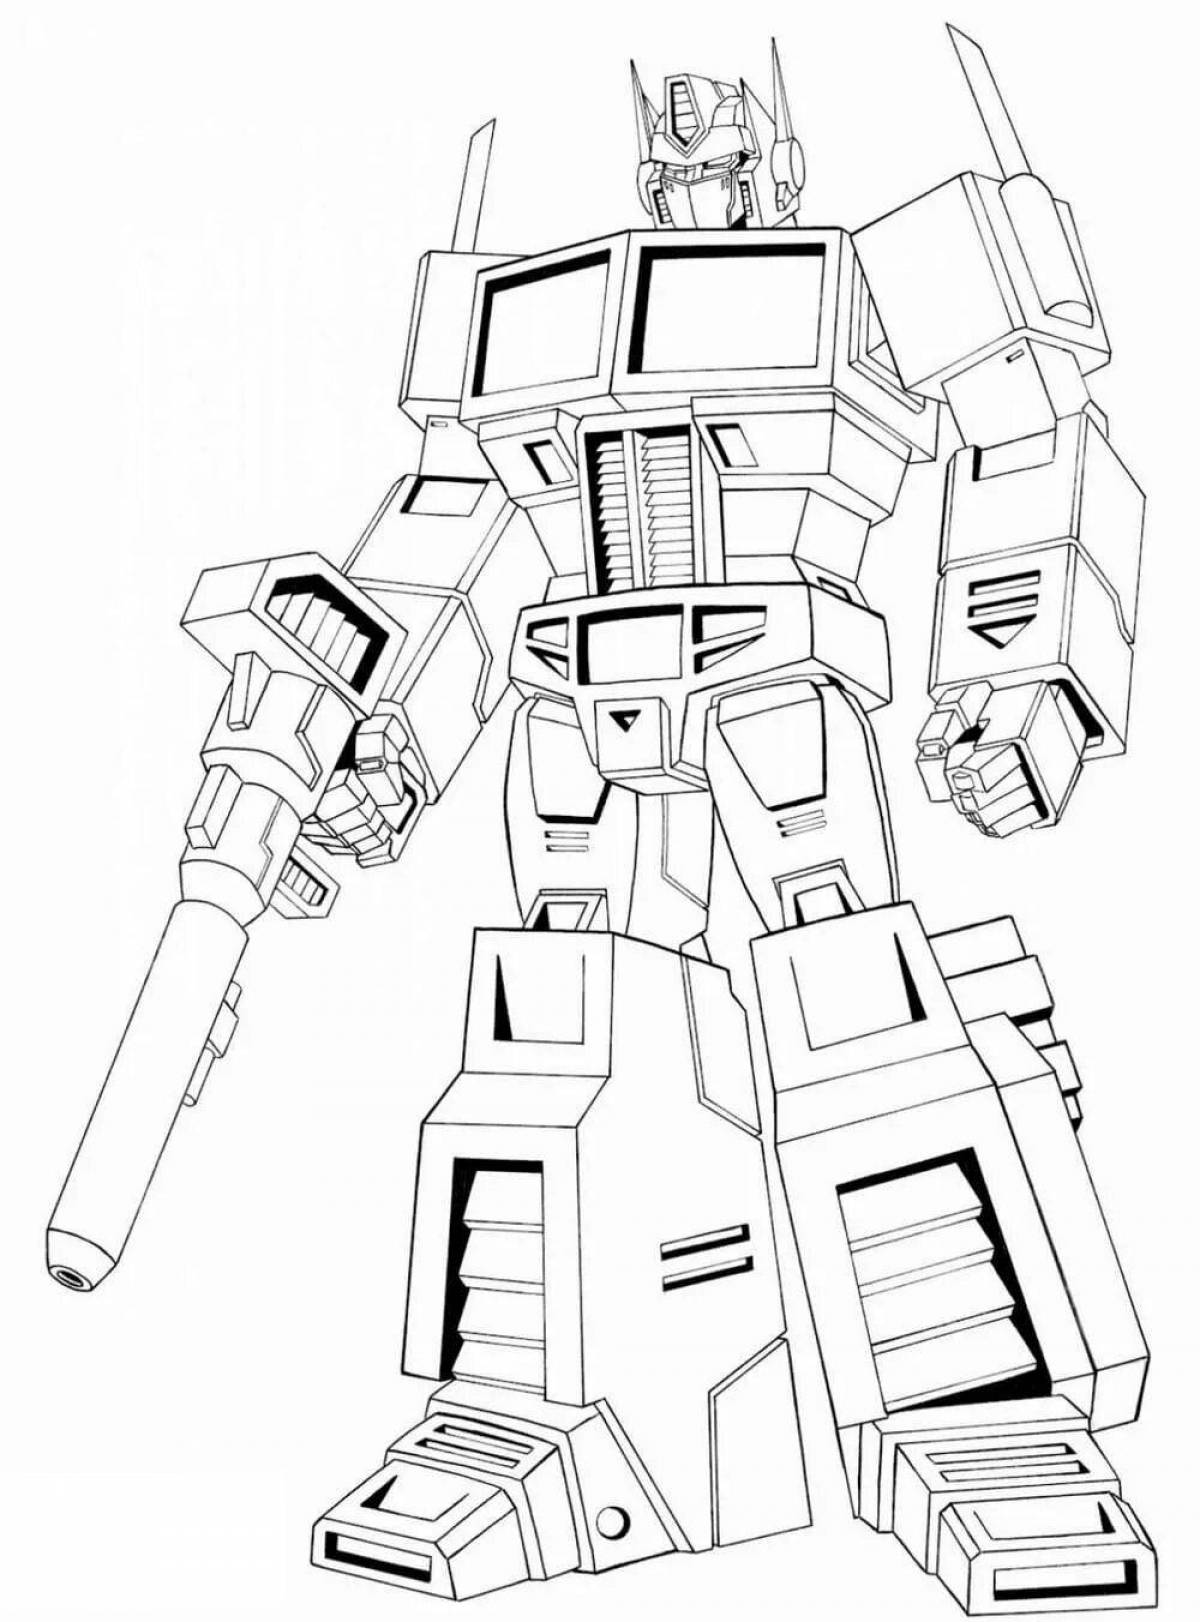 Colorful coloring page for optimus prime's car